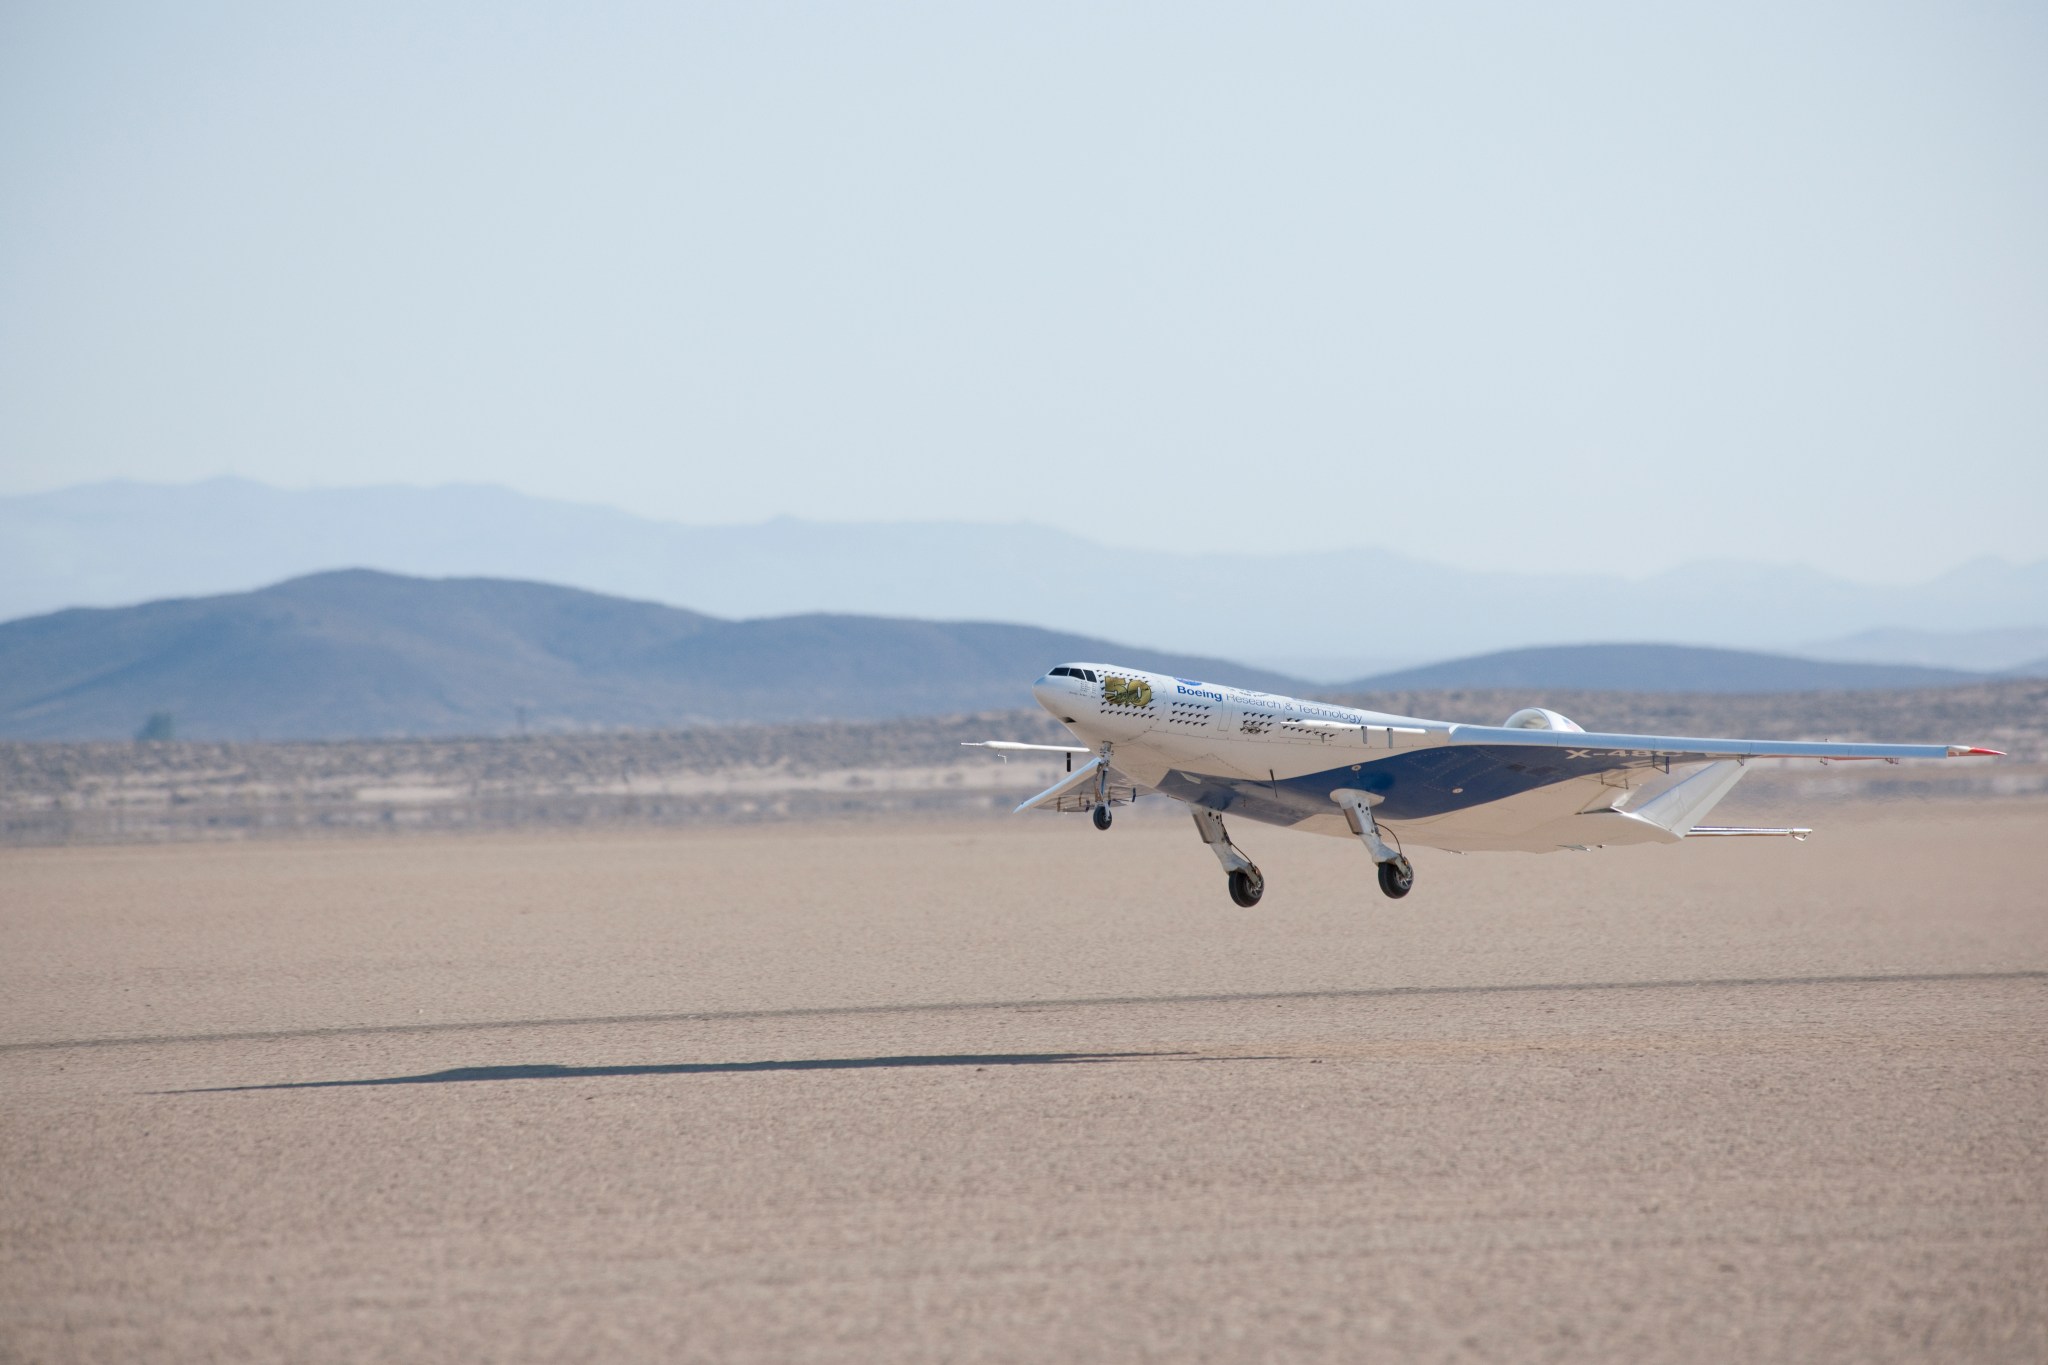 Blended Wing Body Aircraft Lifts Off